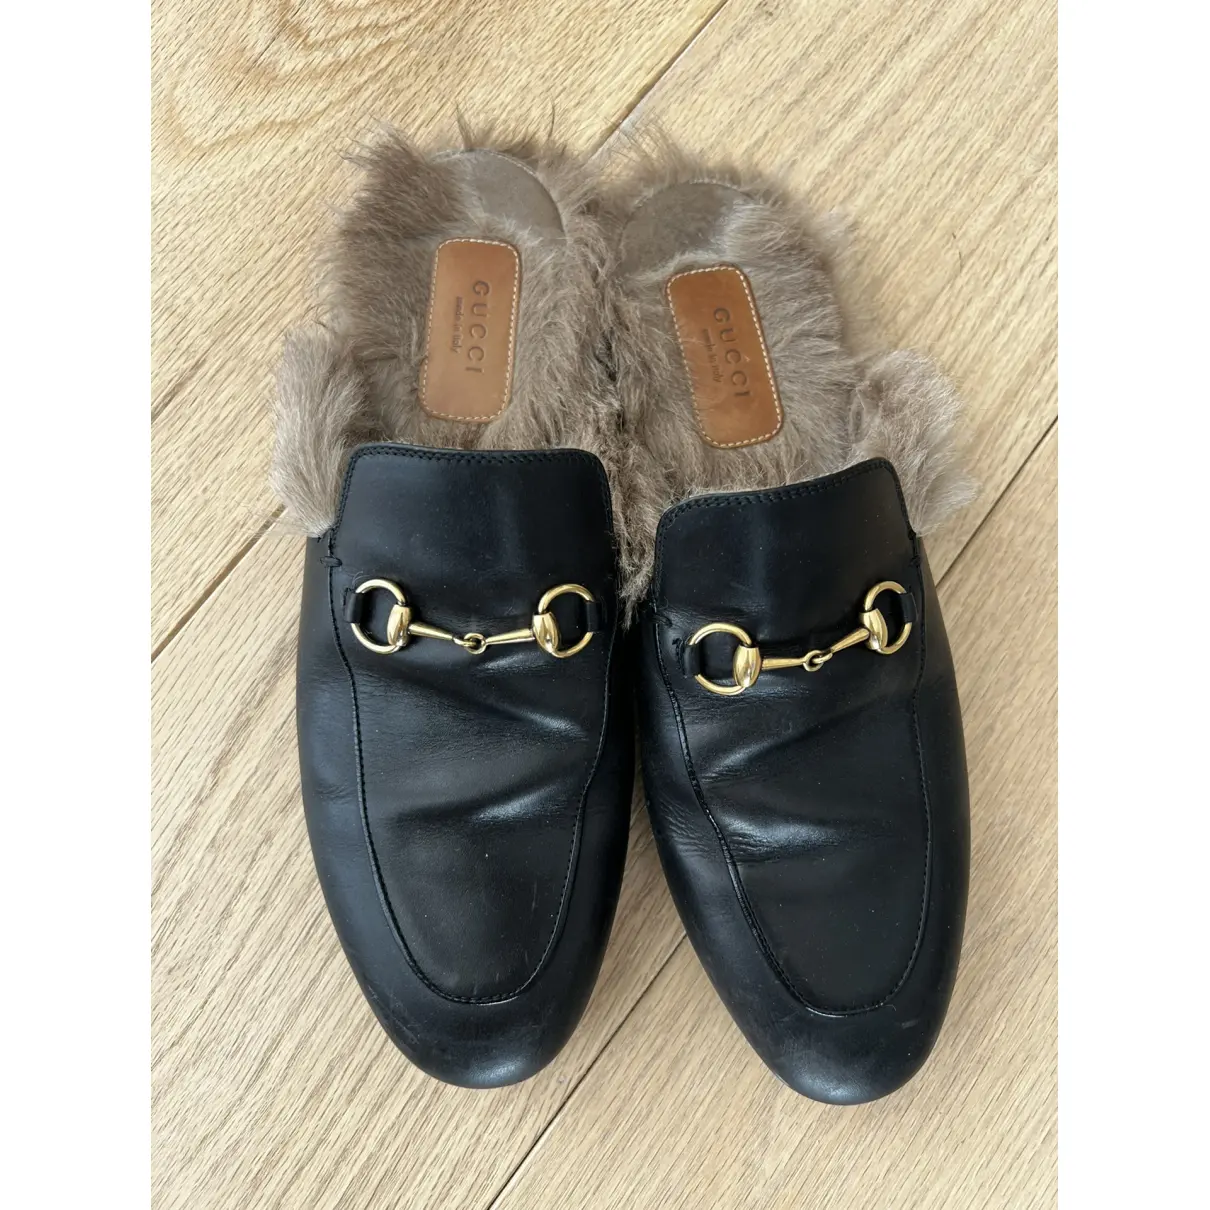 Buy Gucci Princetown leather sandals online